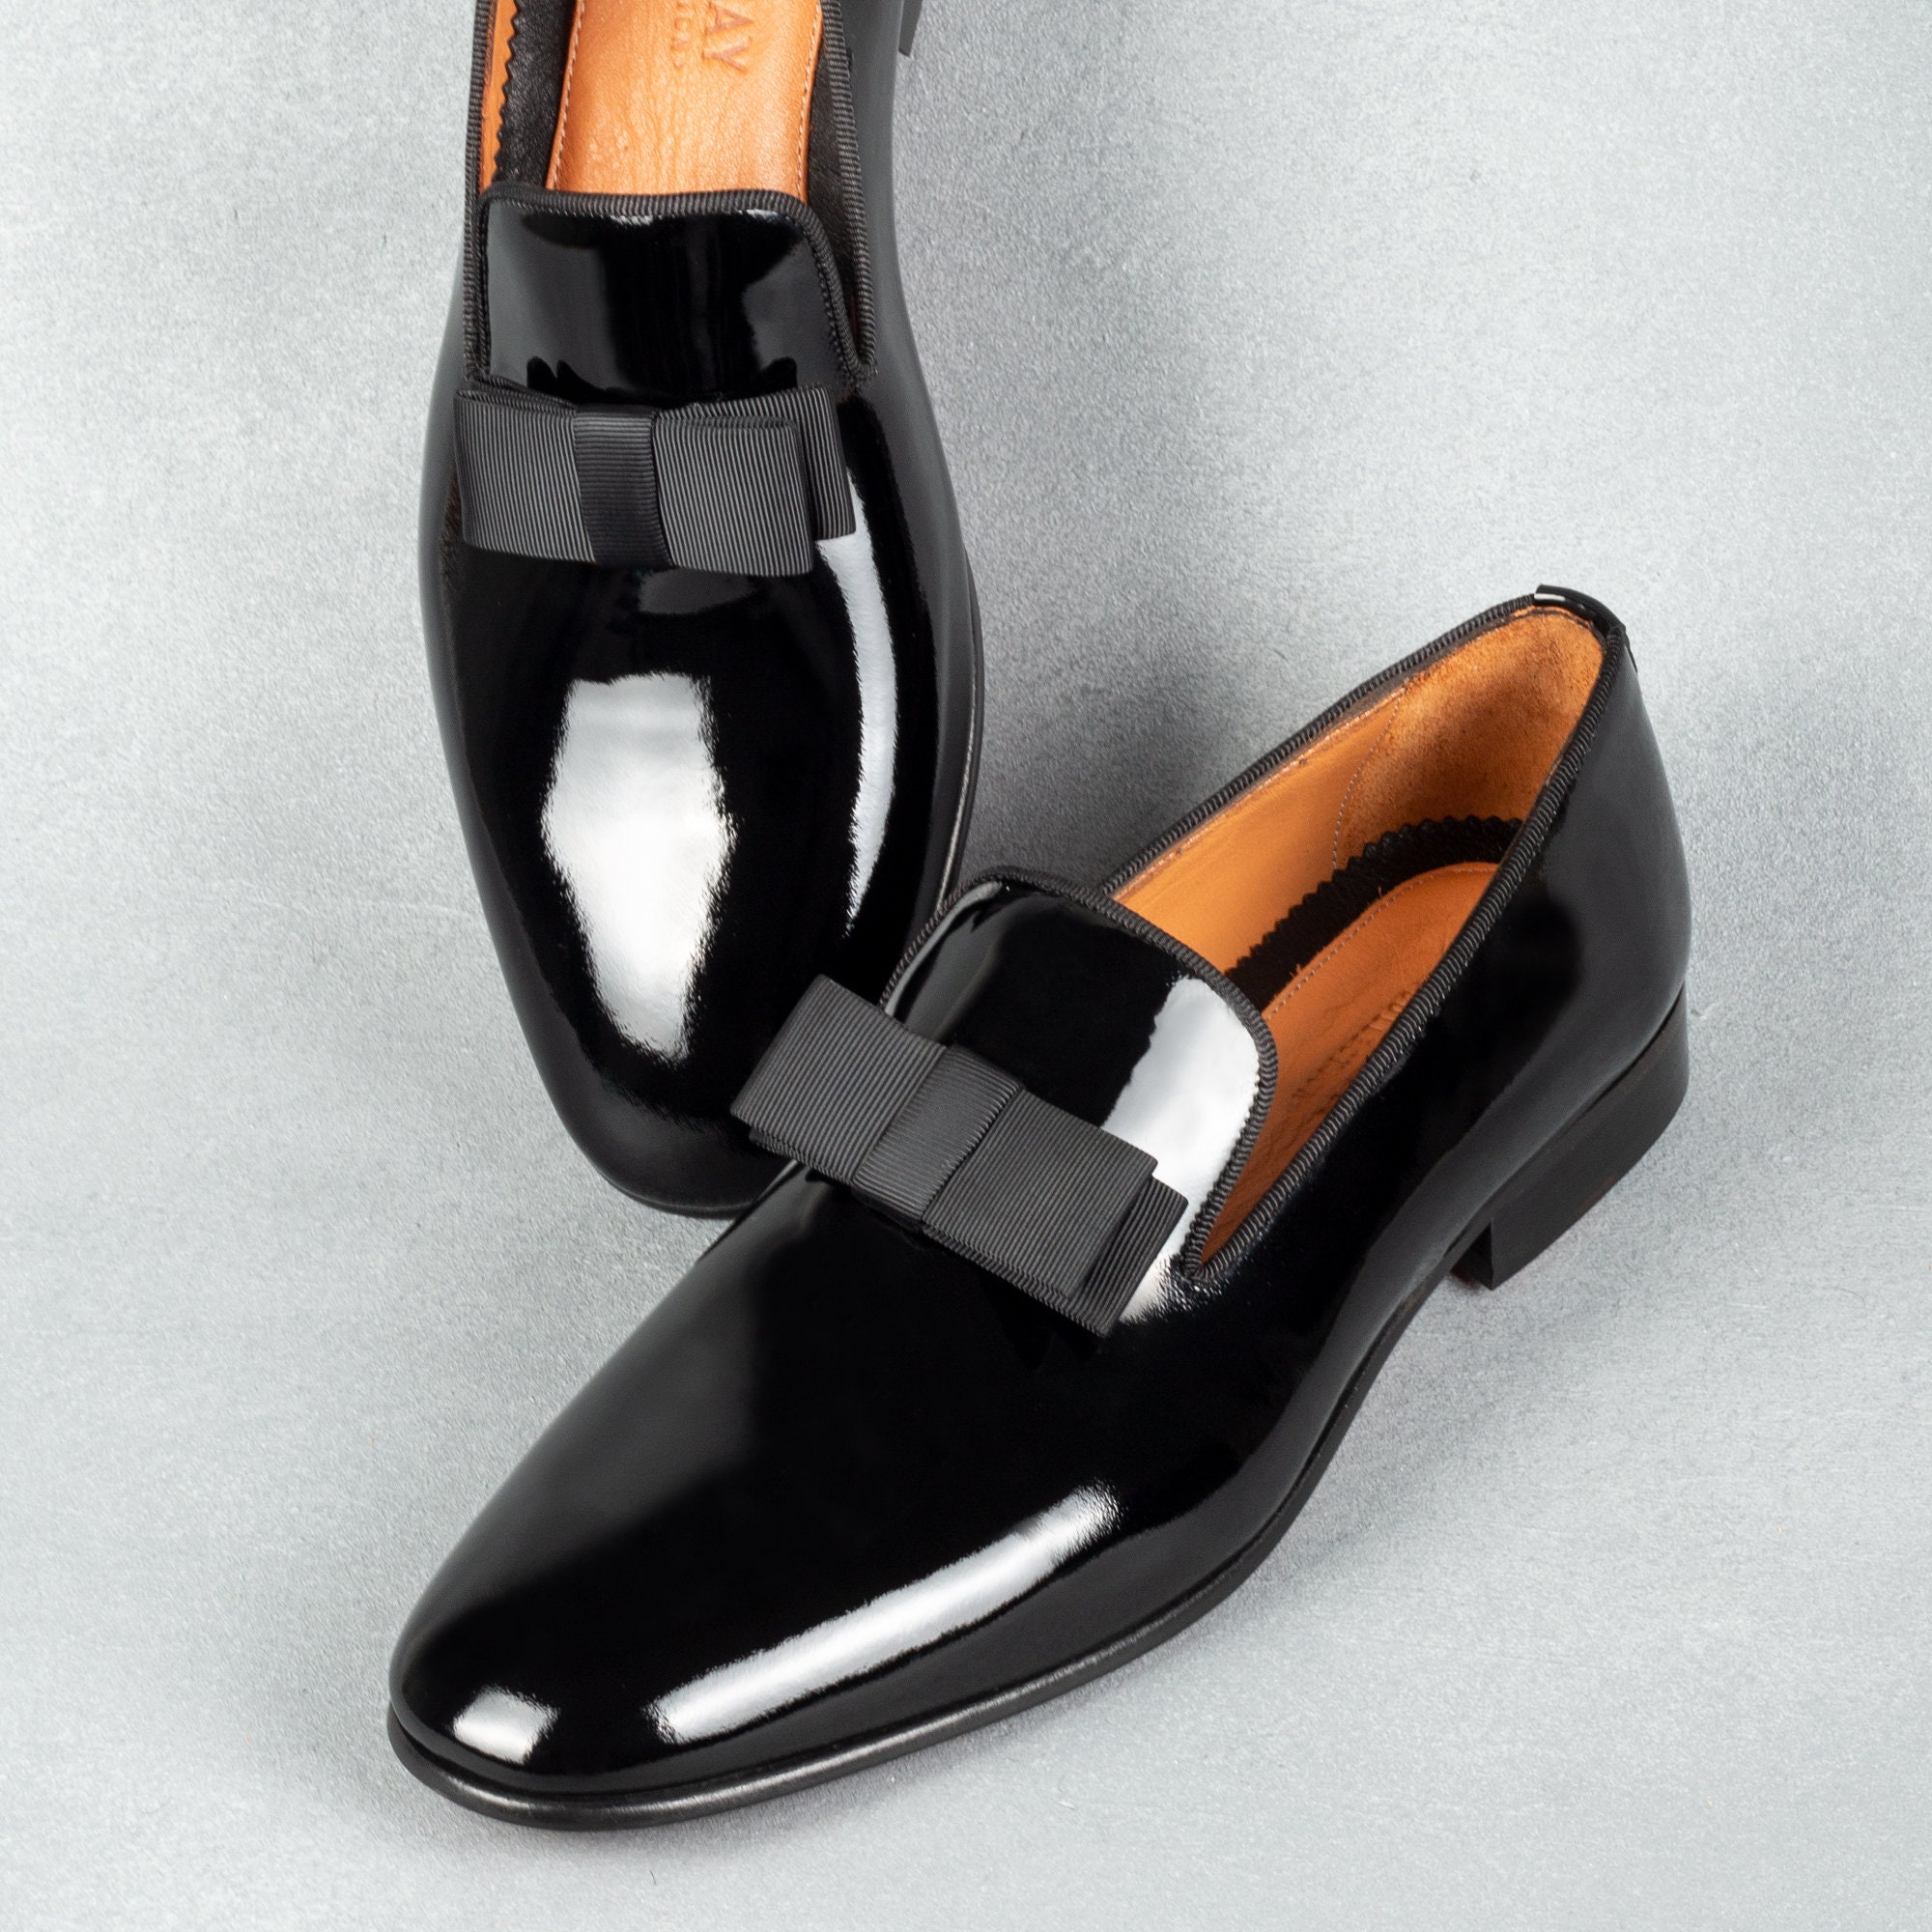 patent leather loafers